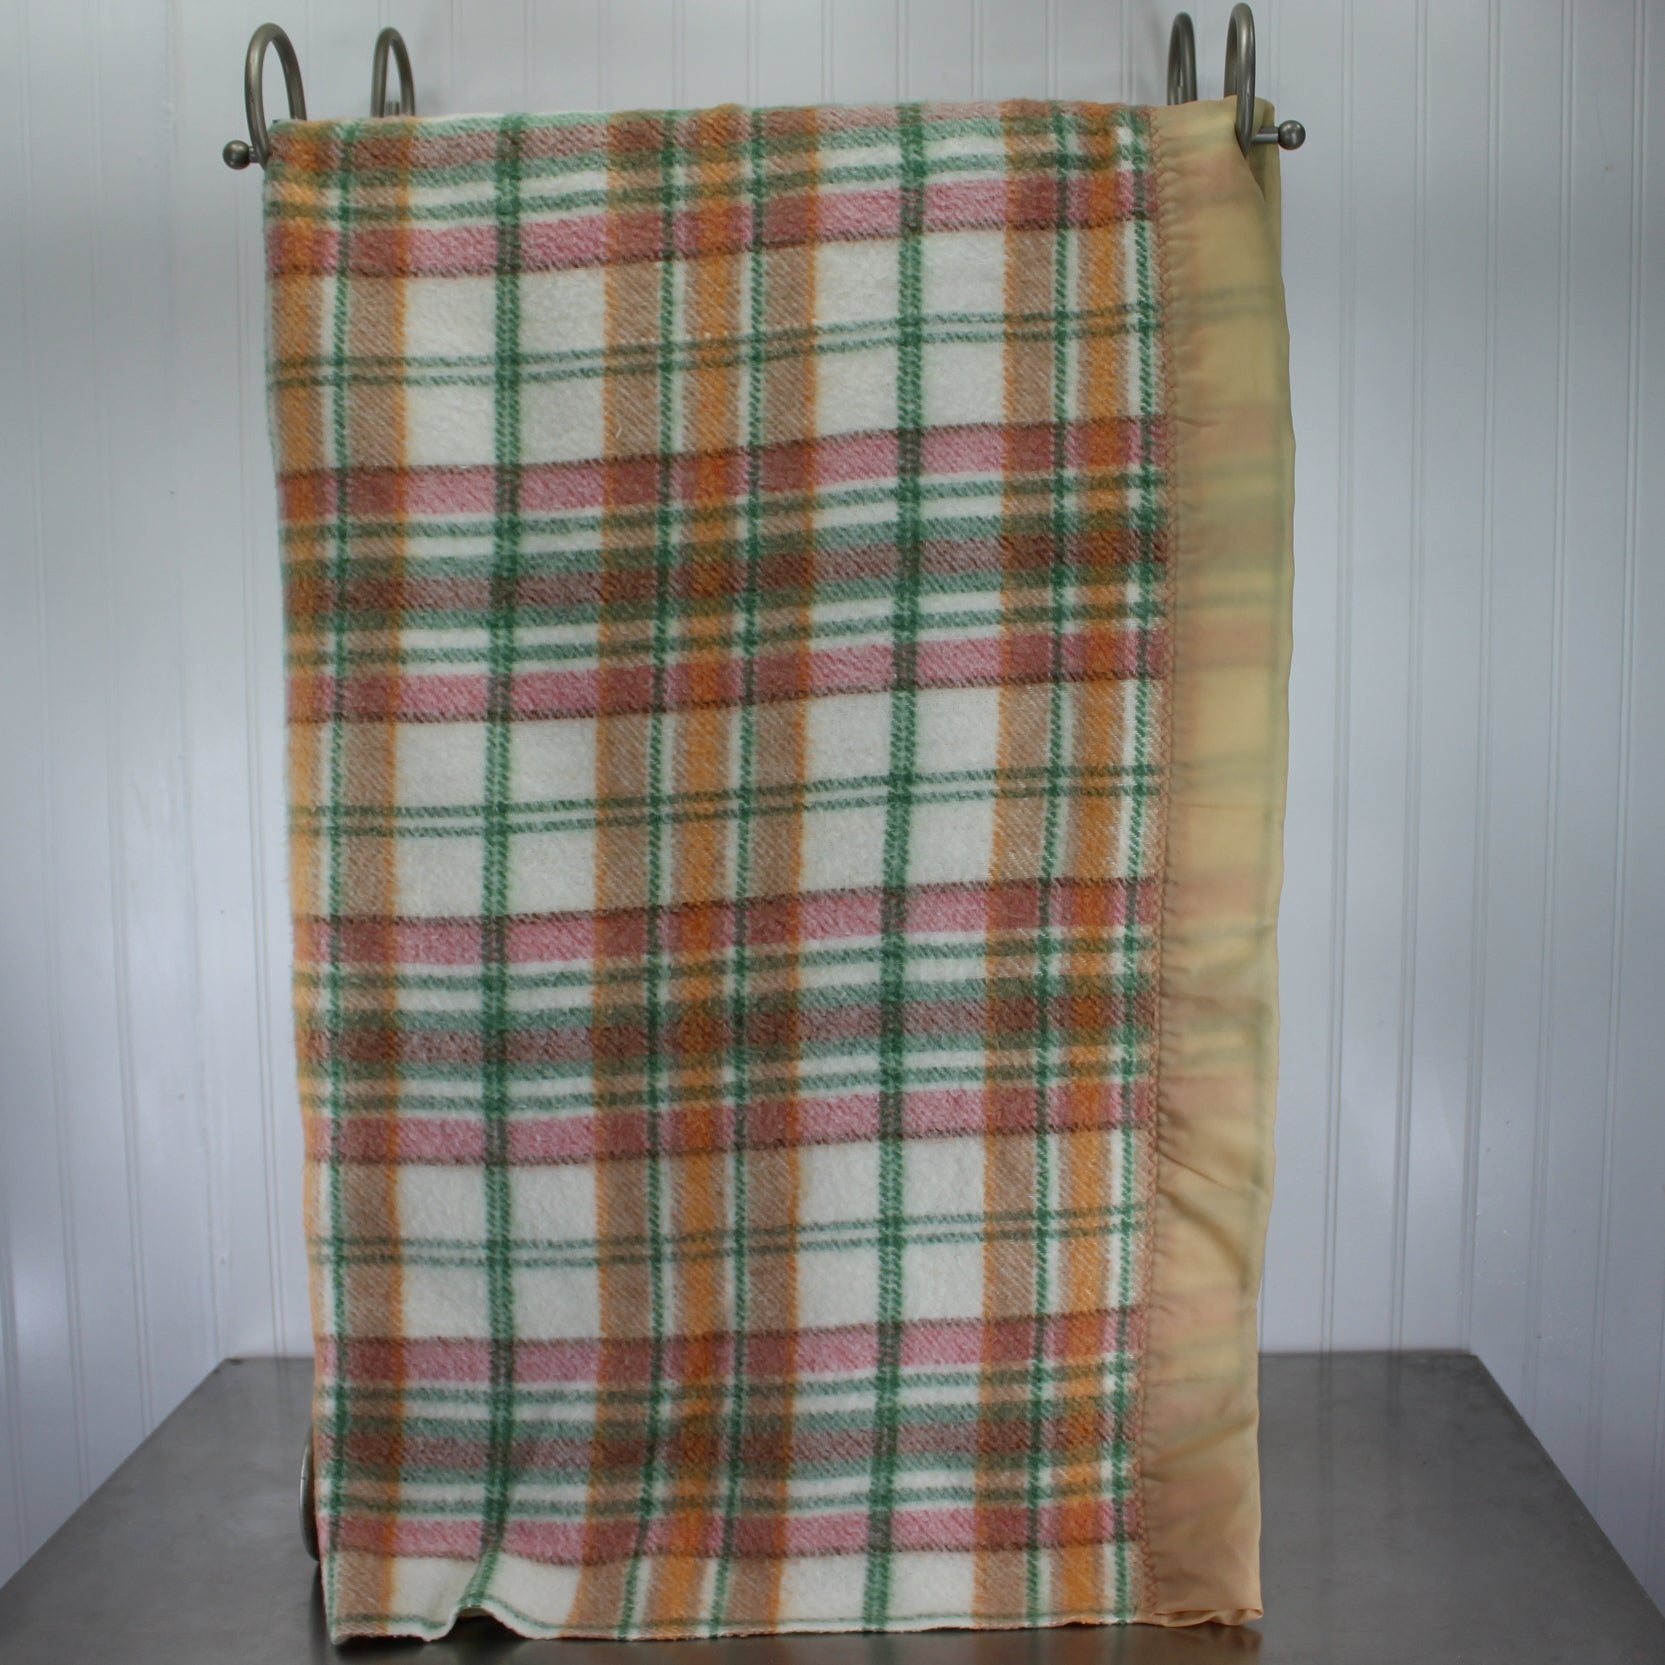 Acrylic Plaid Blanket Green White Pastels 75" X 84" very nice pre owned